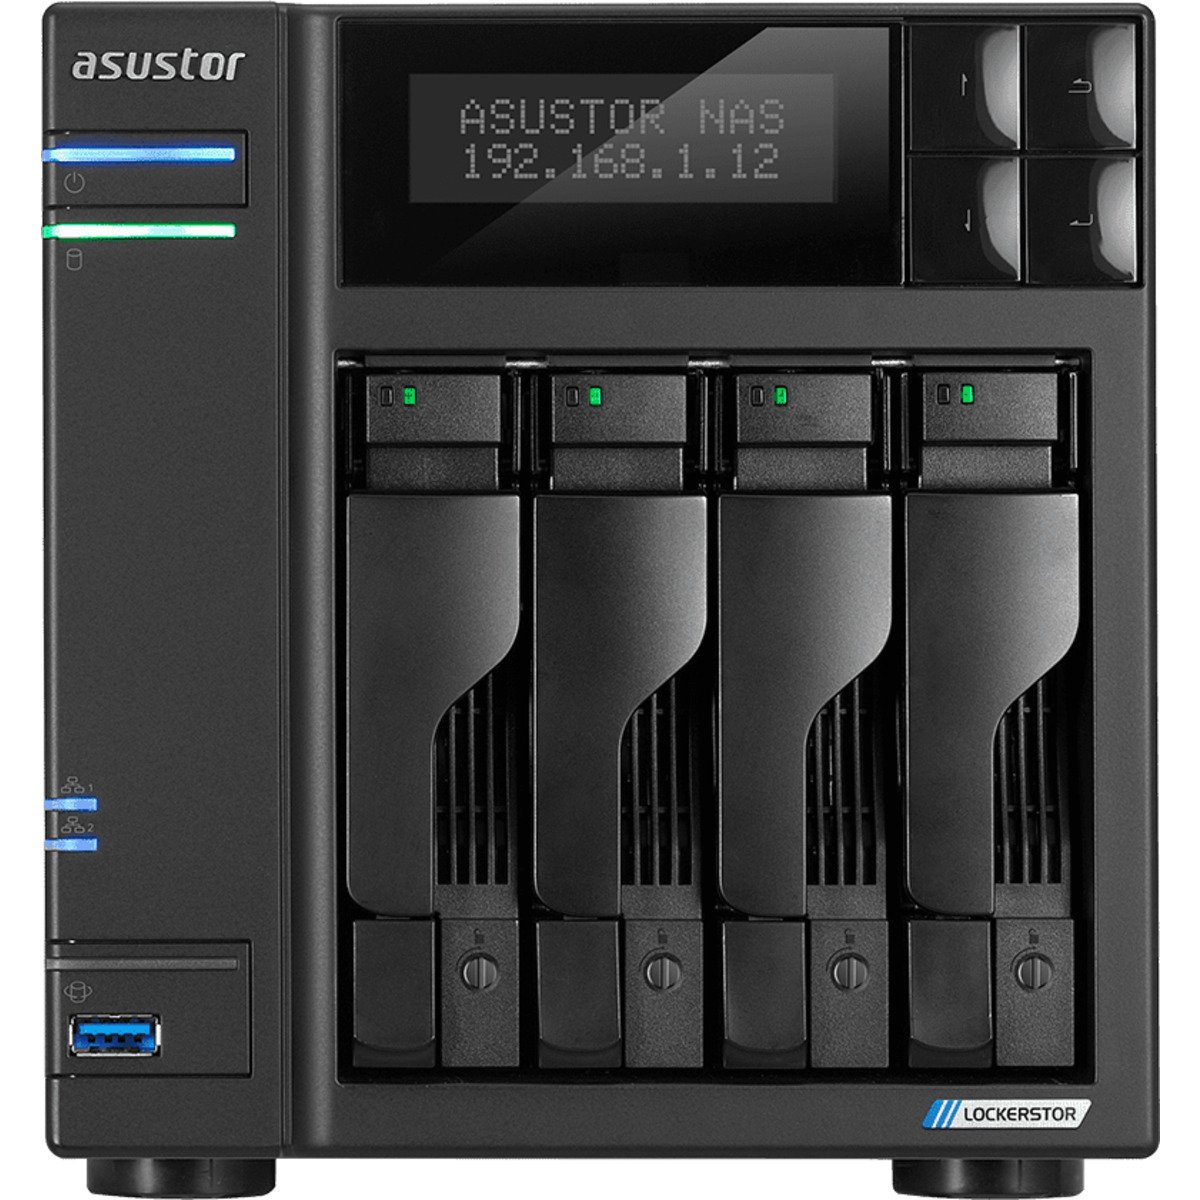 ASUSTOR AS6604T Lockerstor 4 32tb 4-Bay Desktop Multimedia / Power User / Business NAS - Network Attached Storage Device 4x8tb Seagate IronWolf Pro ST8000NT001 3.5 7200rpm SATA 6Gb/s HDD NAS Class Drives Installed - Burn-In Tested - ON SALE - FREE RAM UPGRADE AS6604T Lockerstor 4